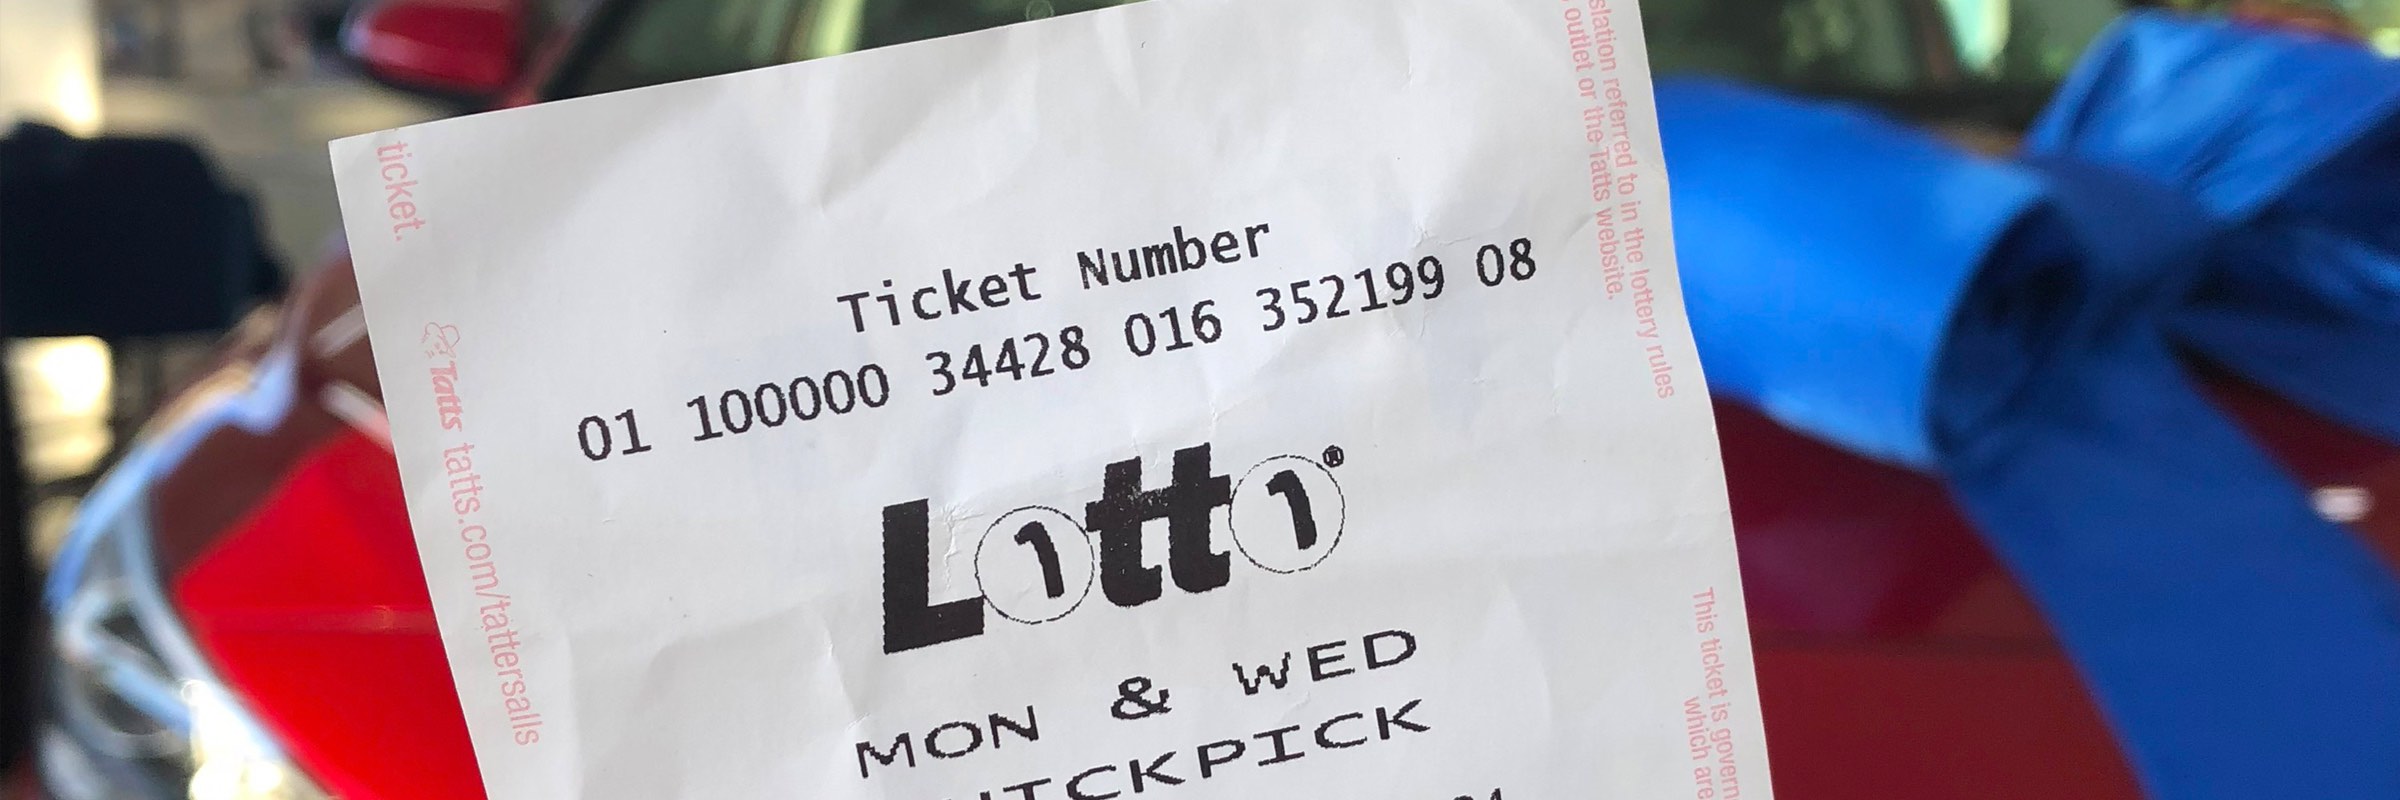 new monday and thursday lotto